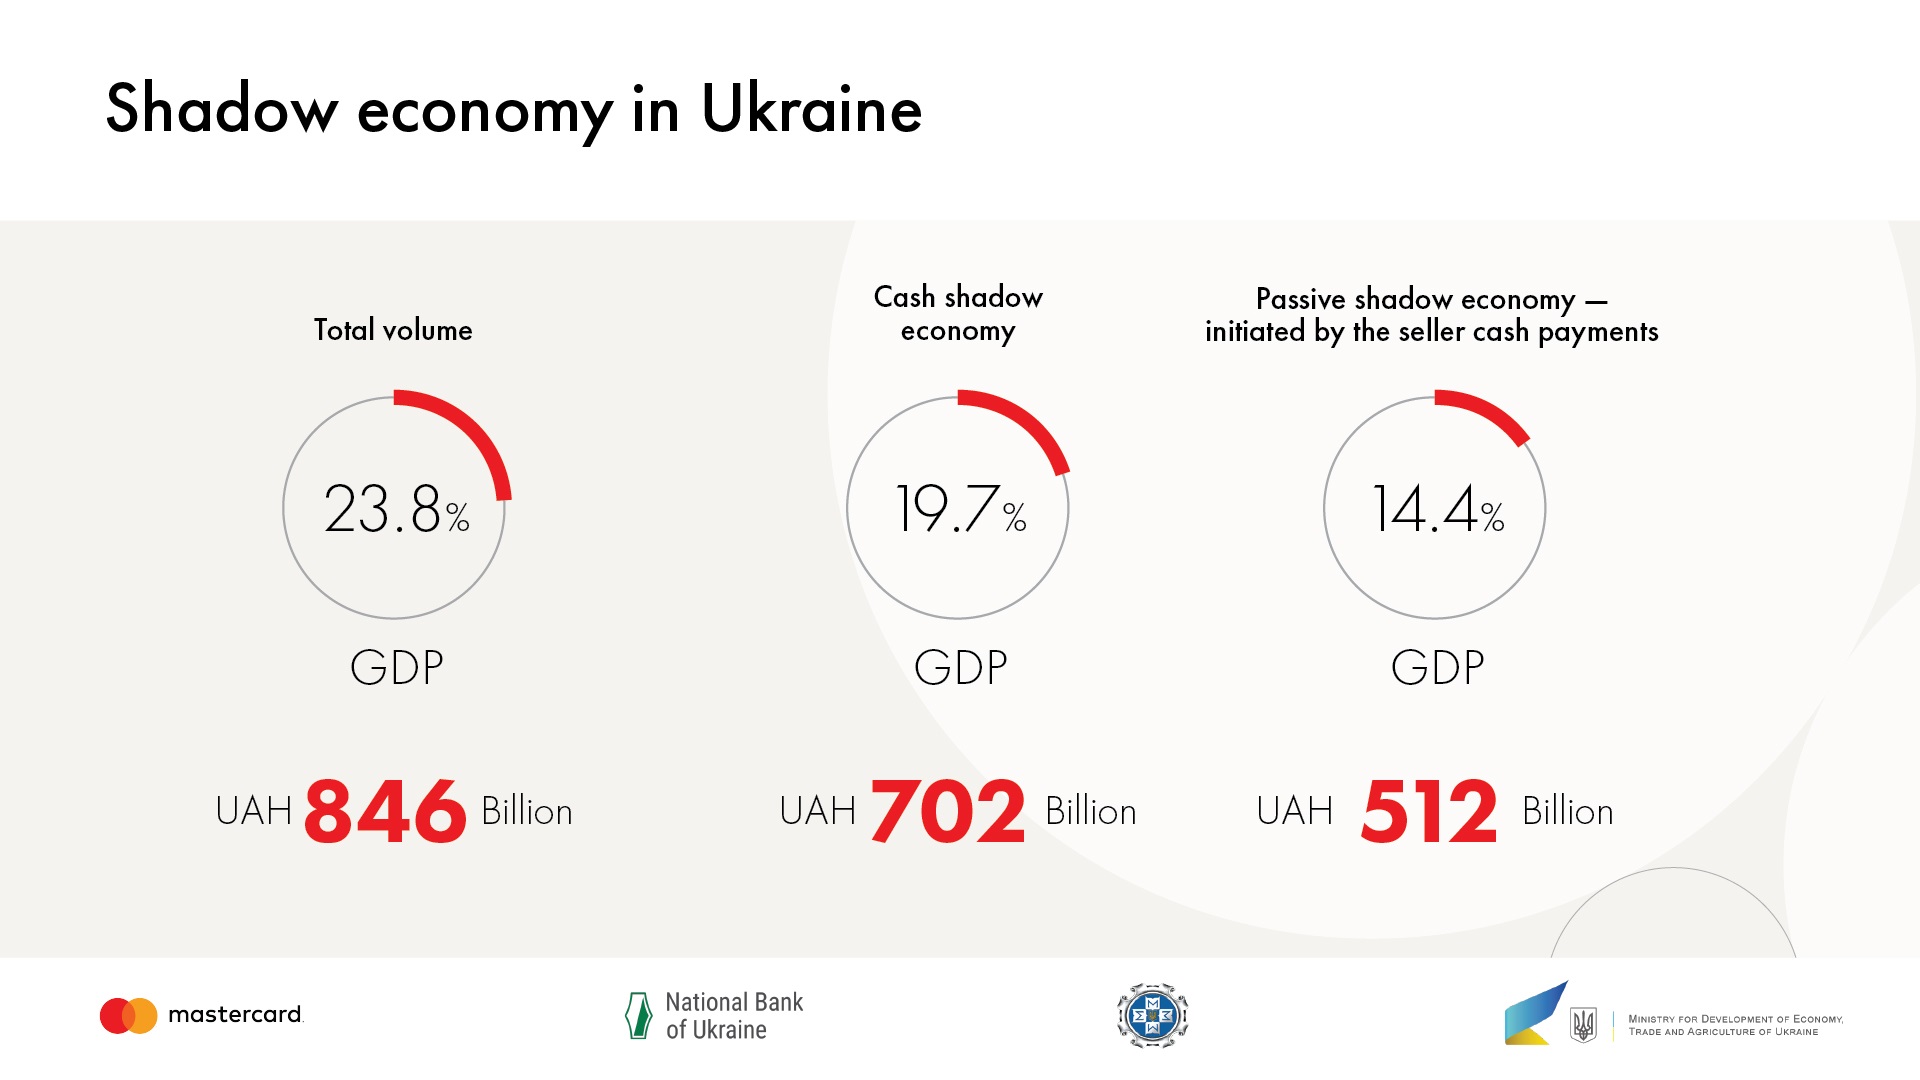 Nearly Quarter of Ukraine’s GDP, or UAH 846 Billion, Is in Shadow – Study of Shadow Economy Finds